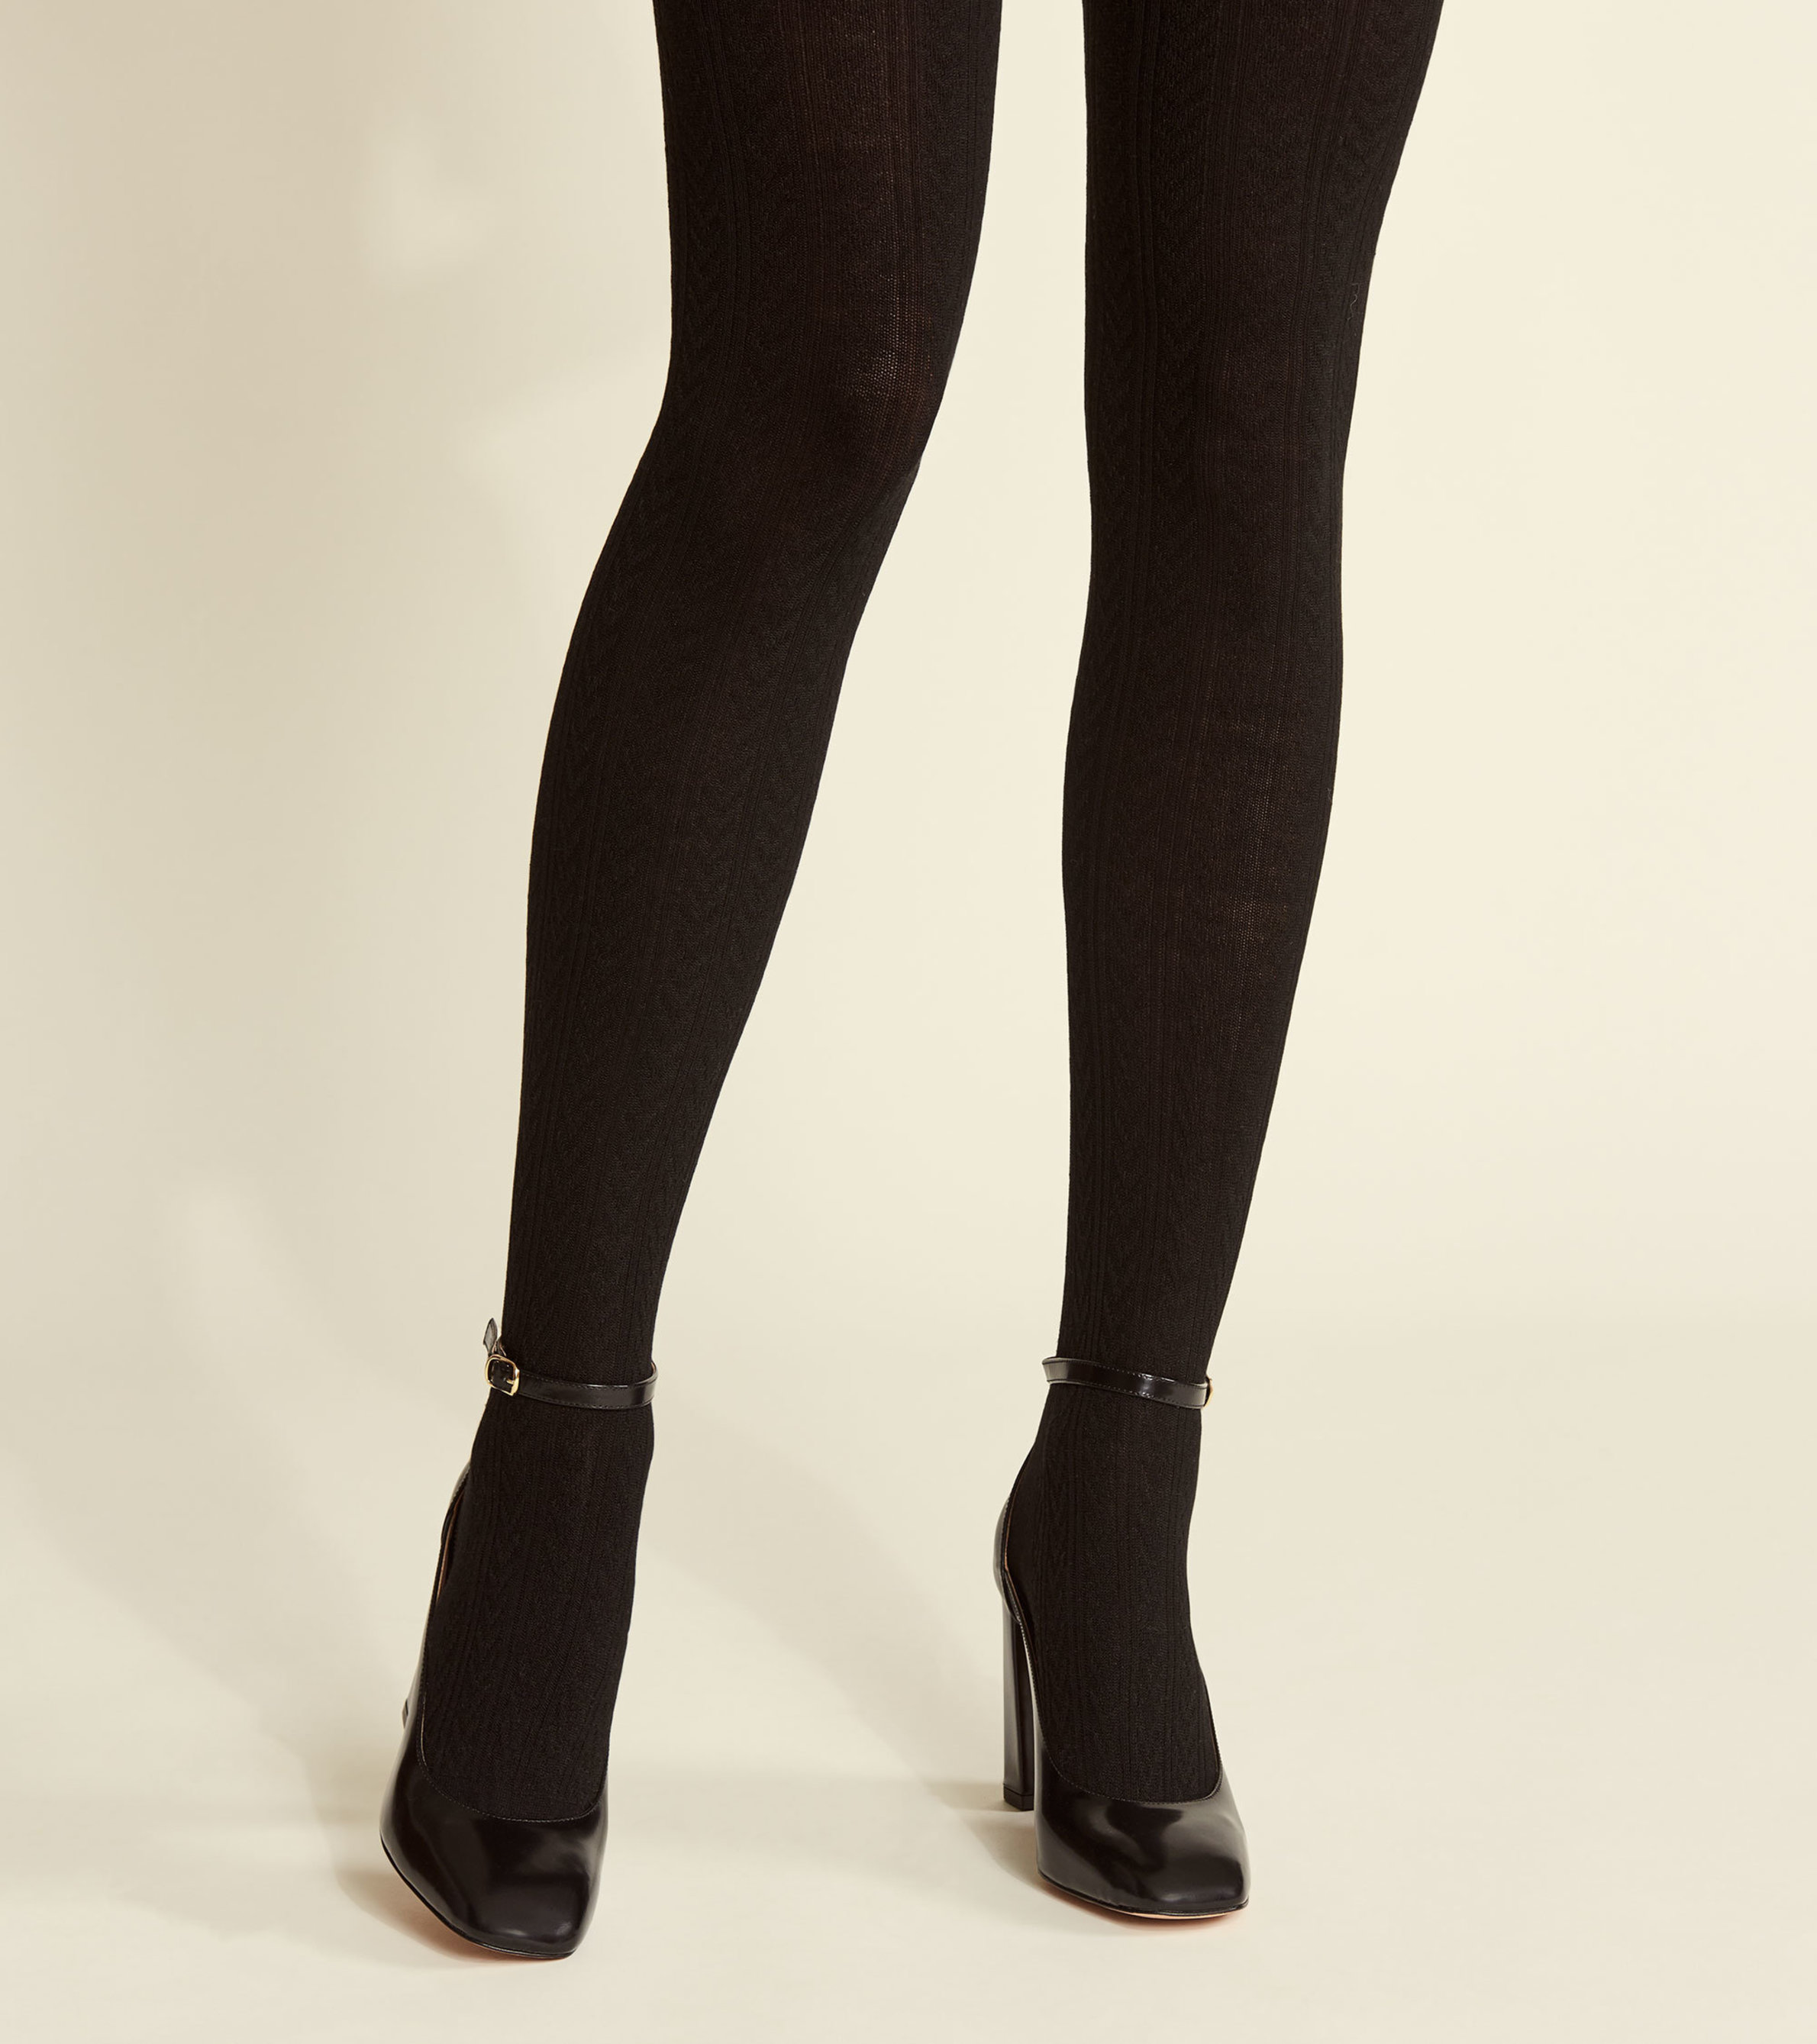 https://cdn.hatley.com/product_images/cable-knit-tights-black/F19BBL1335_jpg/pdp_zoom.jpg?c=1600359180&locale=us_en